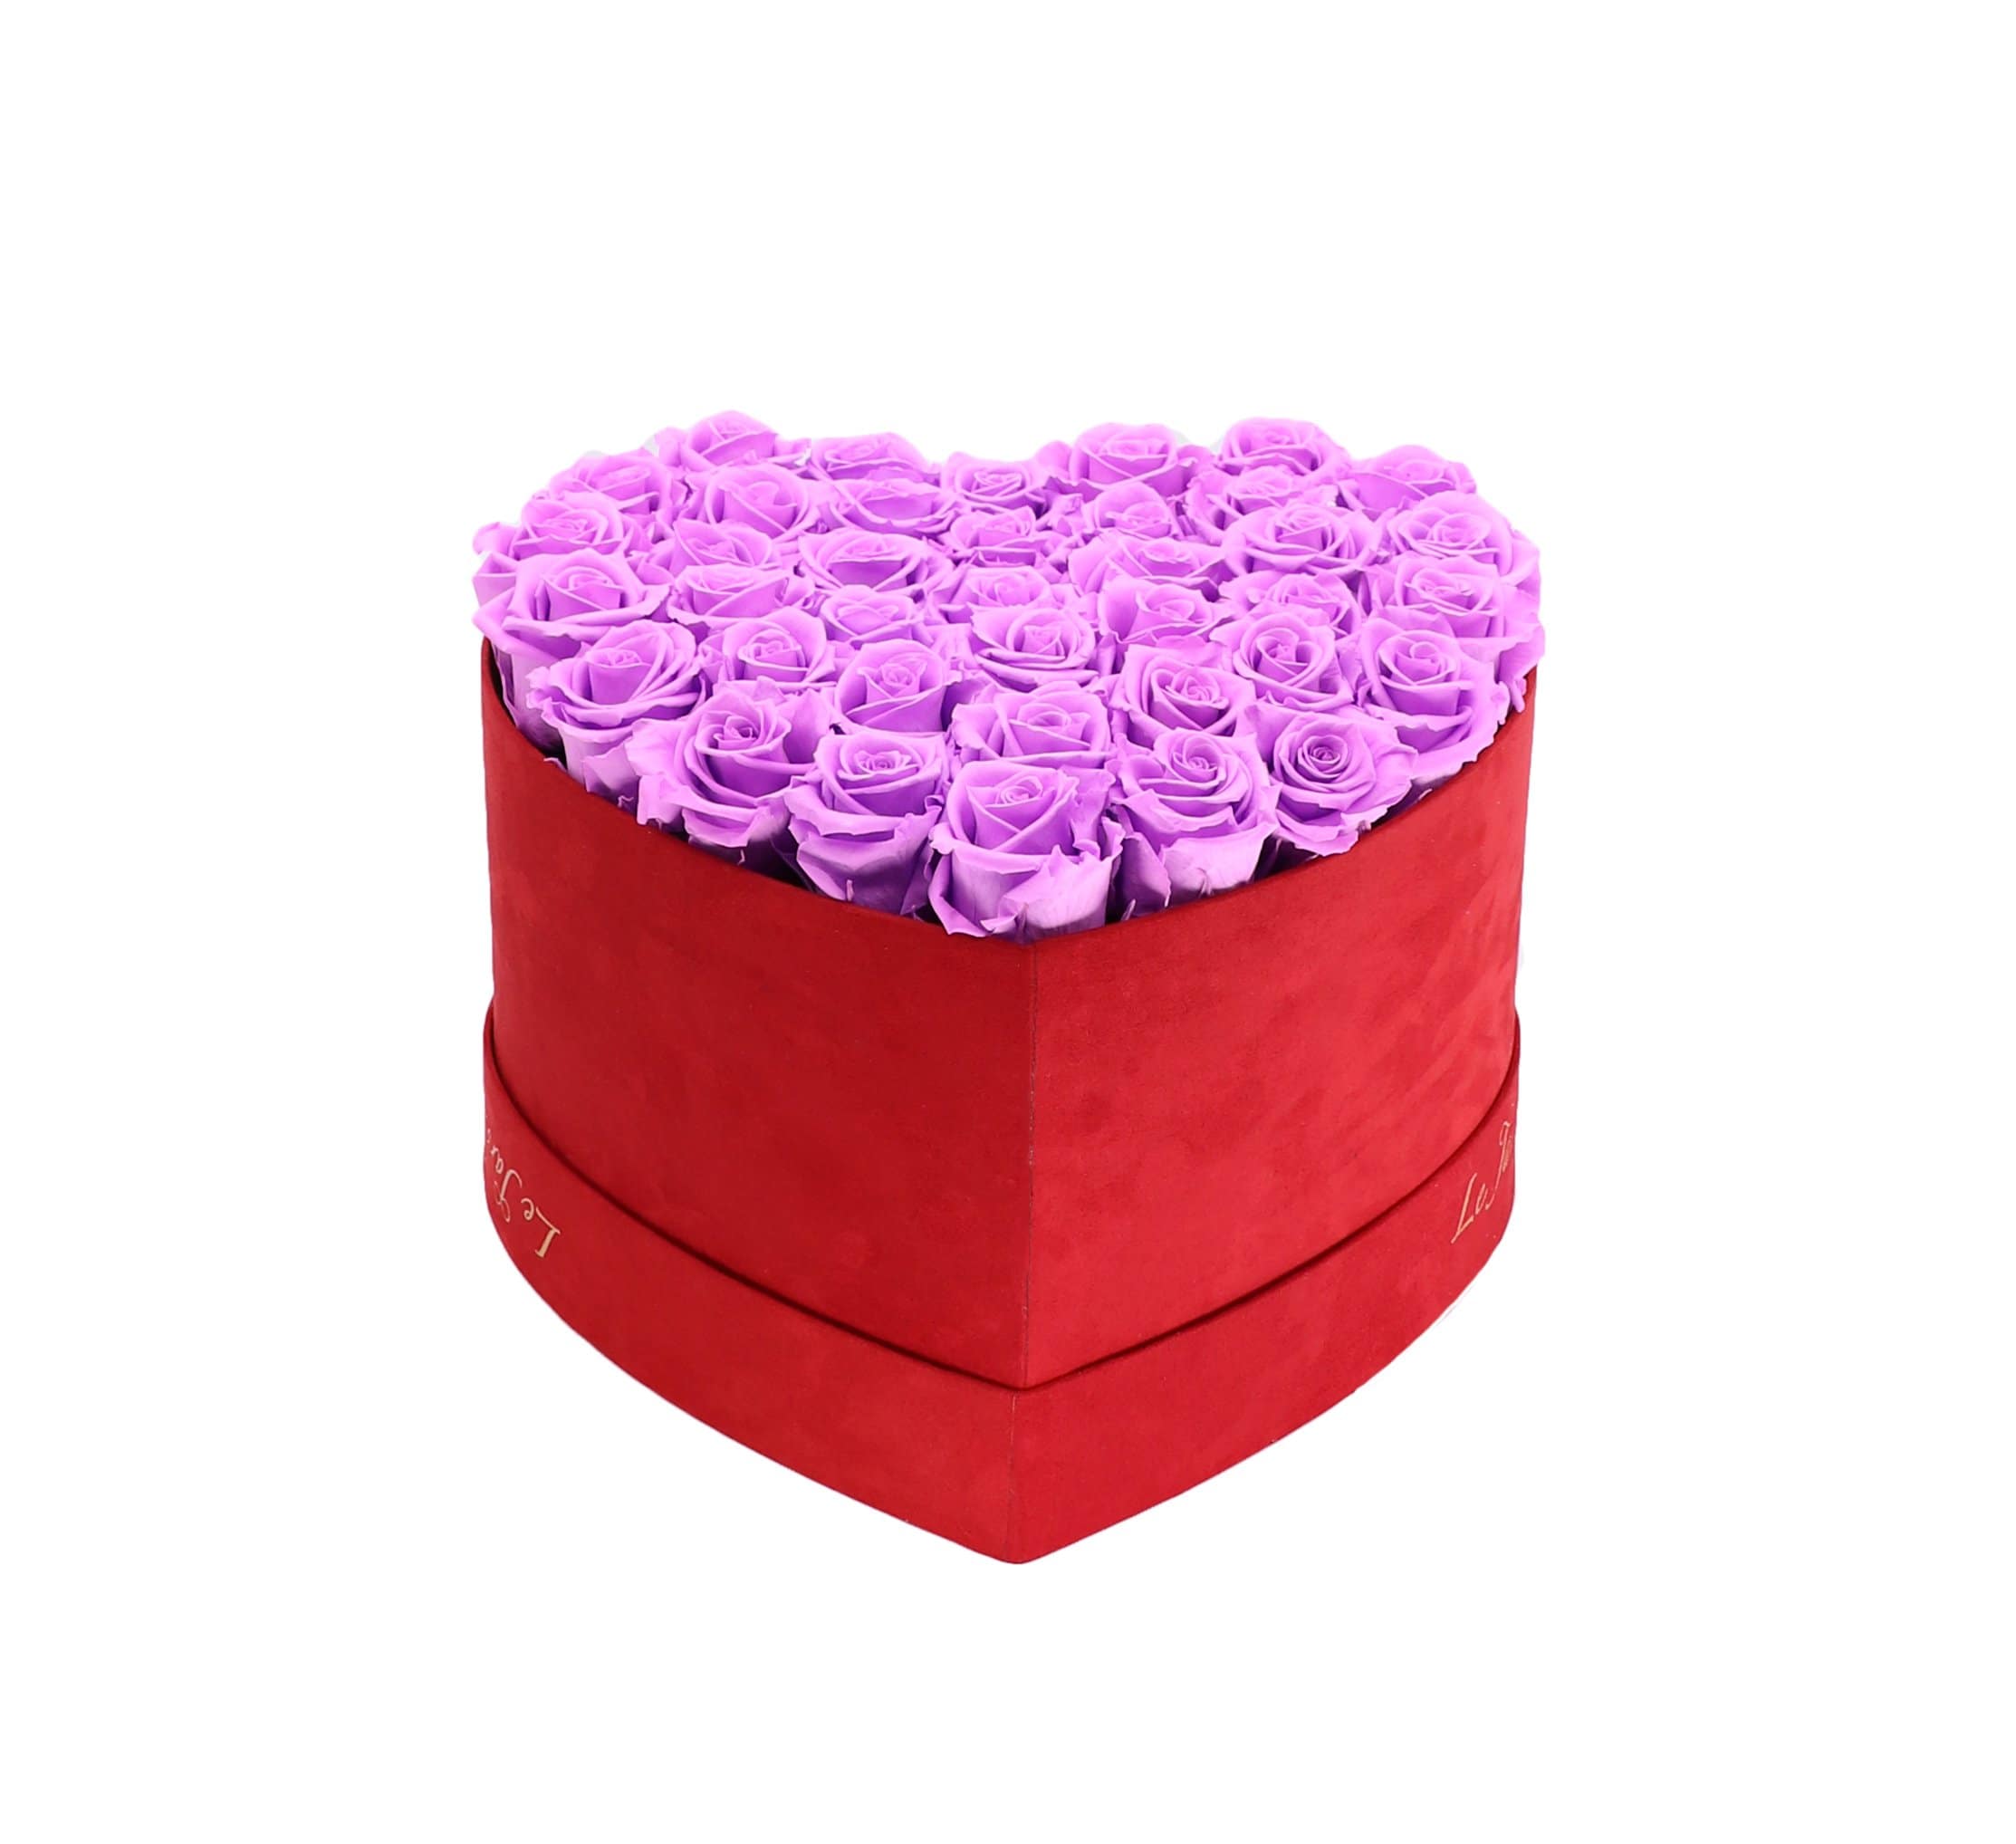 36 Lilac Preserved Roses in A Heart Shaped Box- Small Heart Luxury Red Suede Box